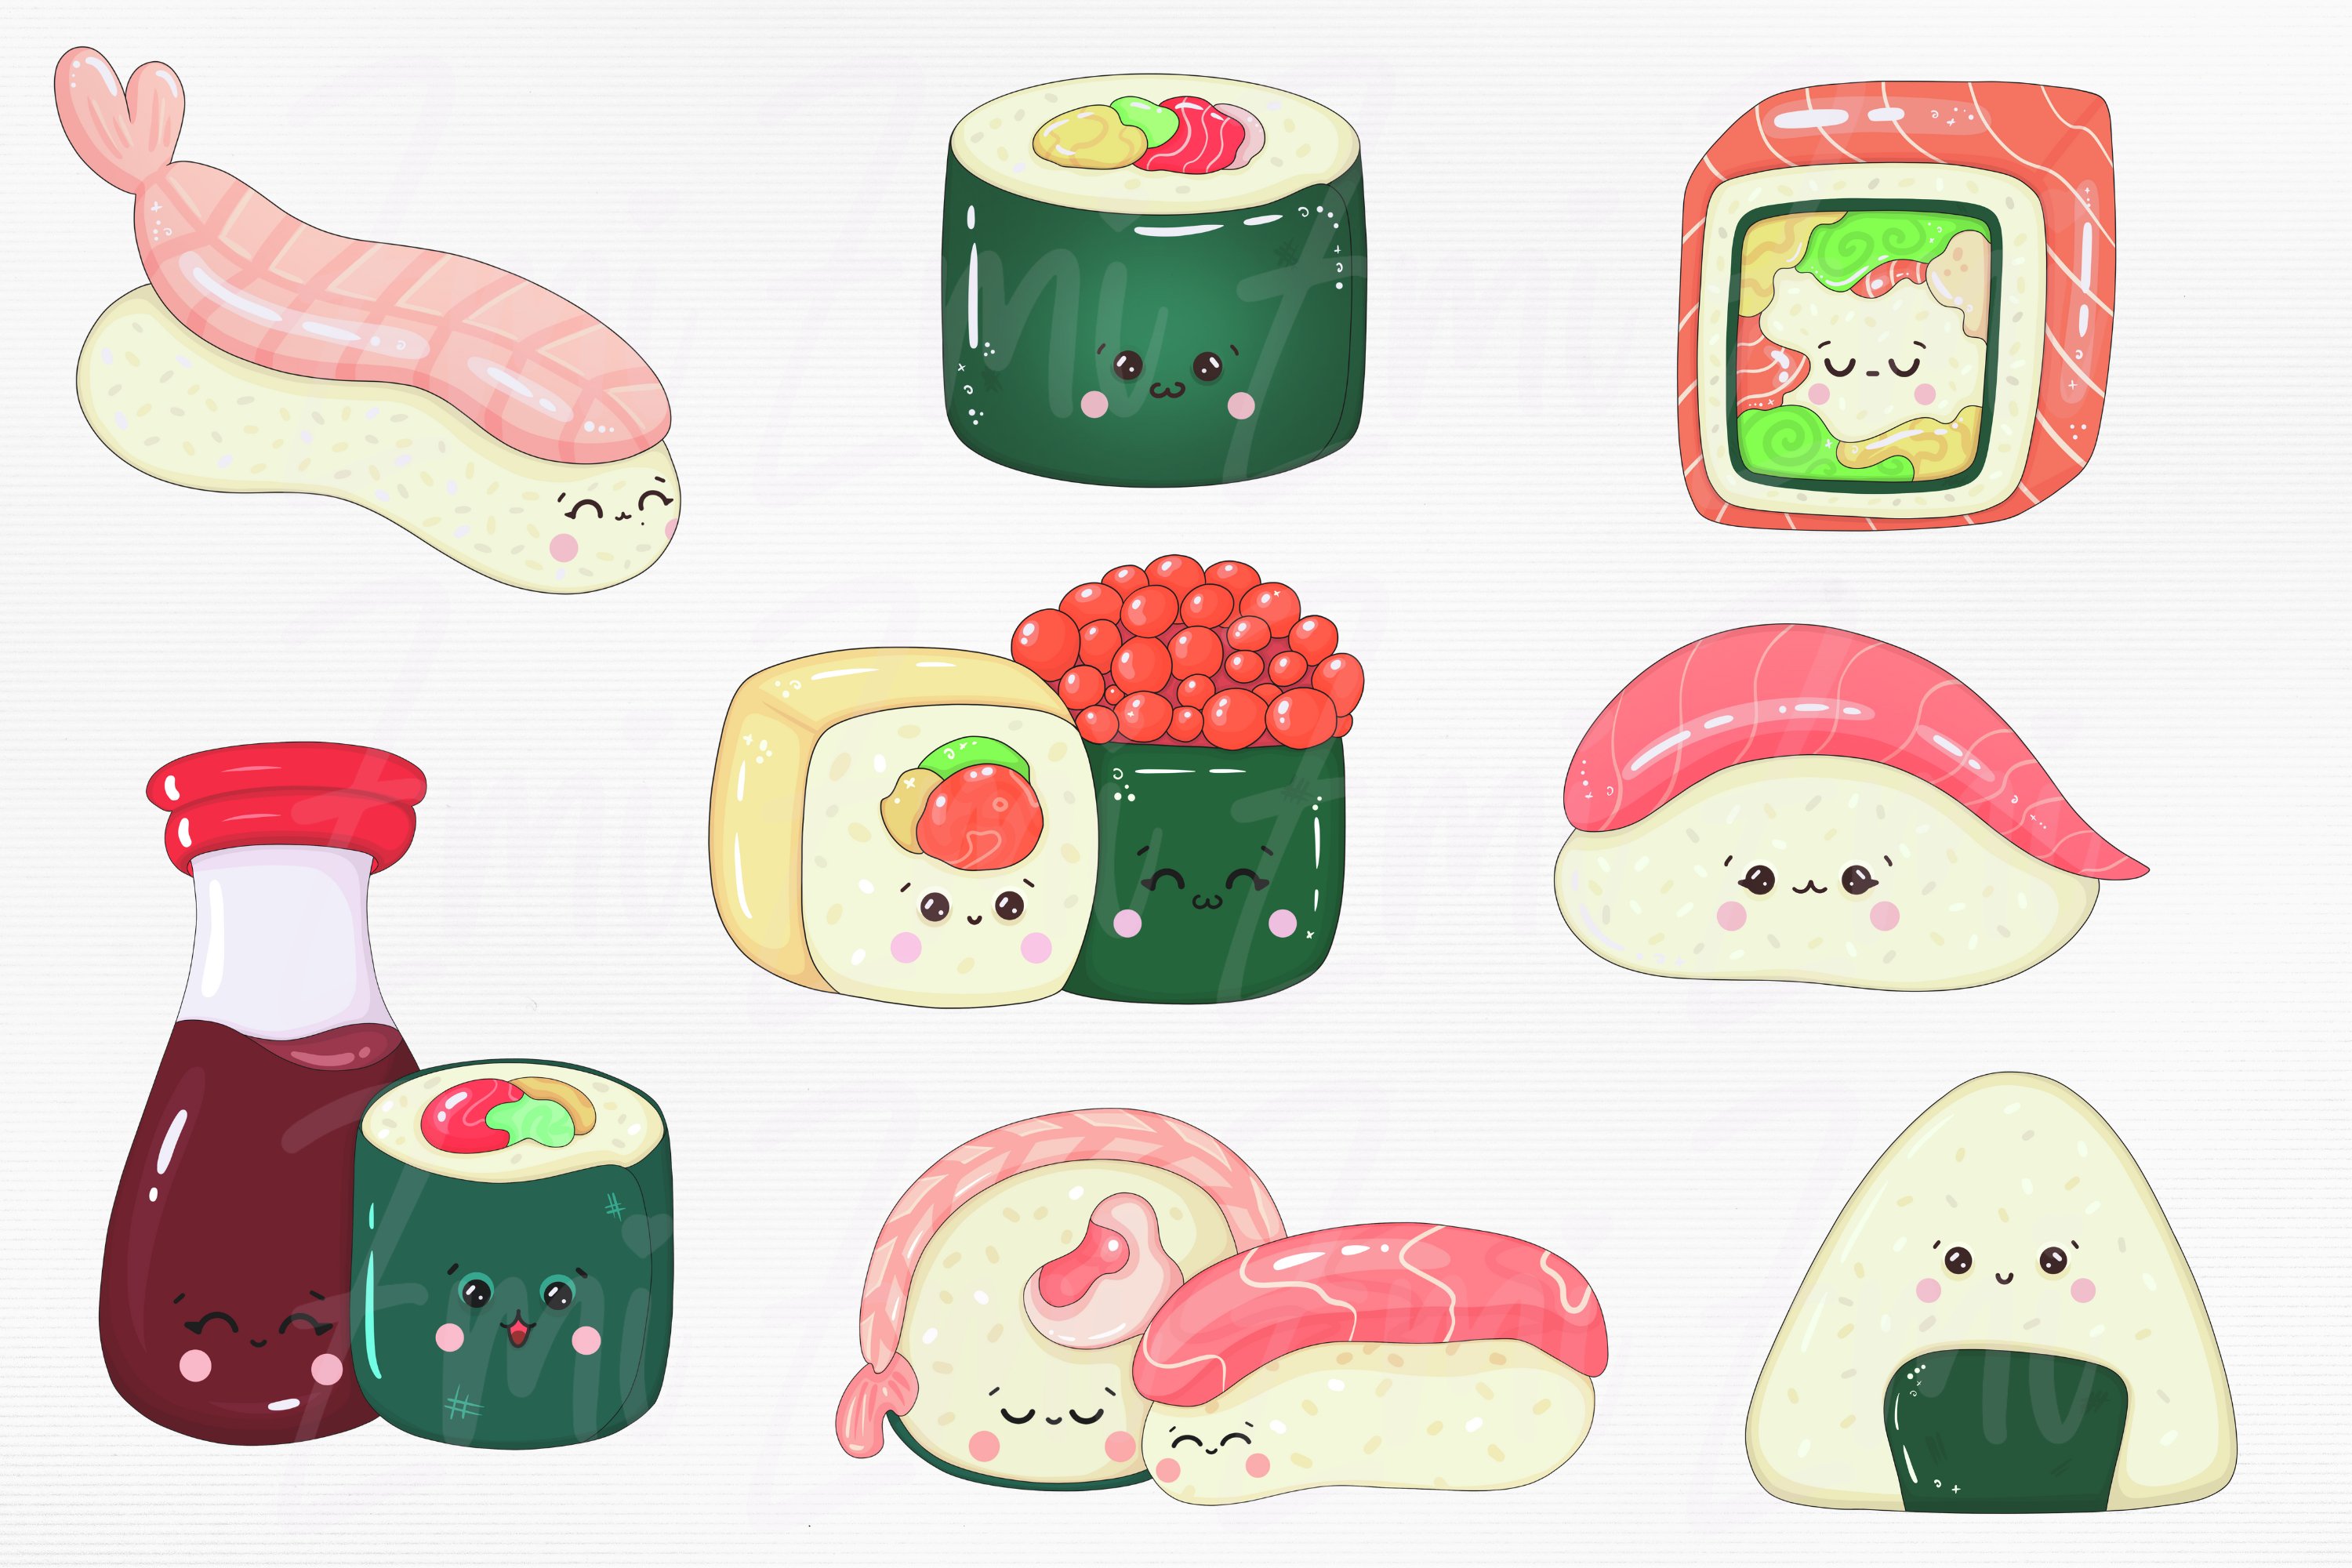 A set of 8 cute sushi illustrations on a gray background.